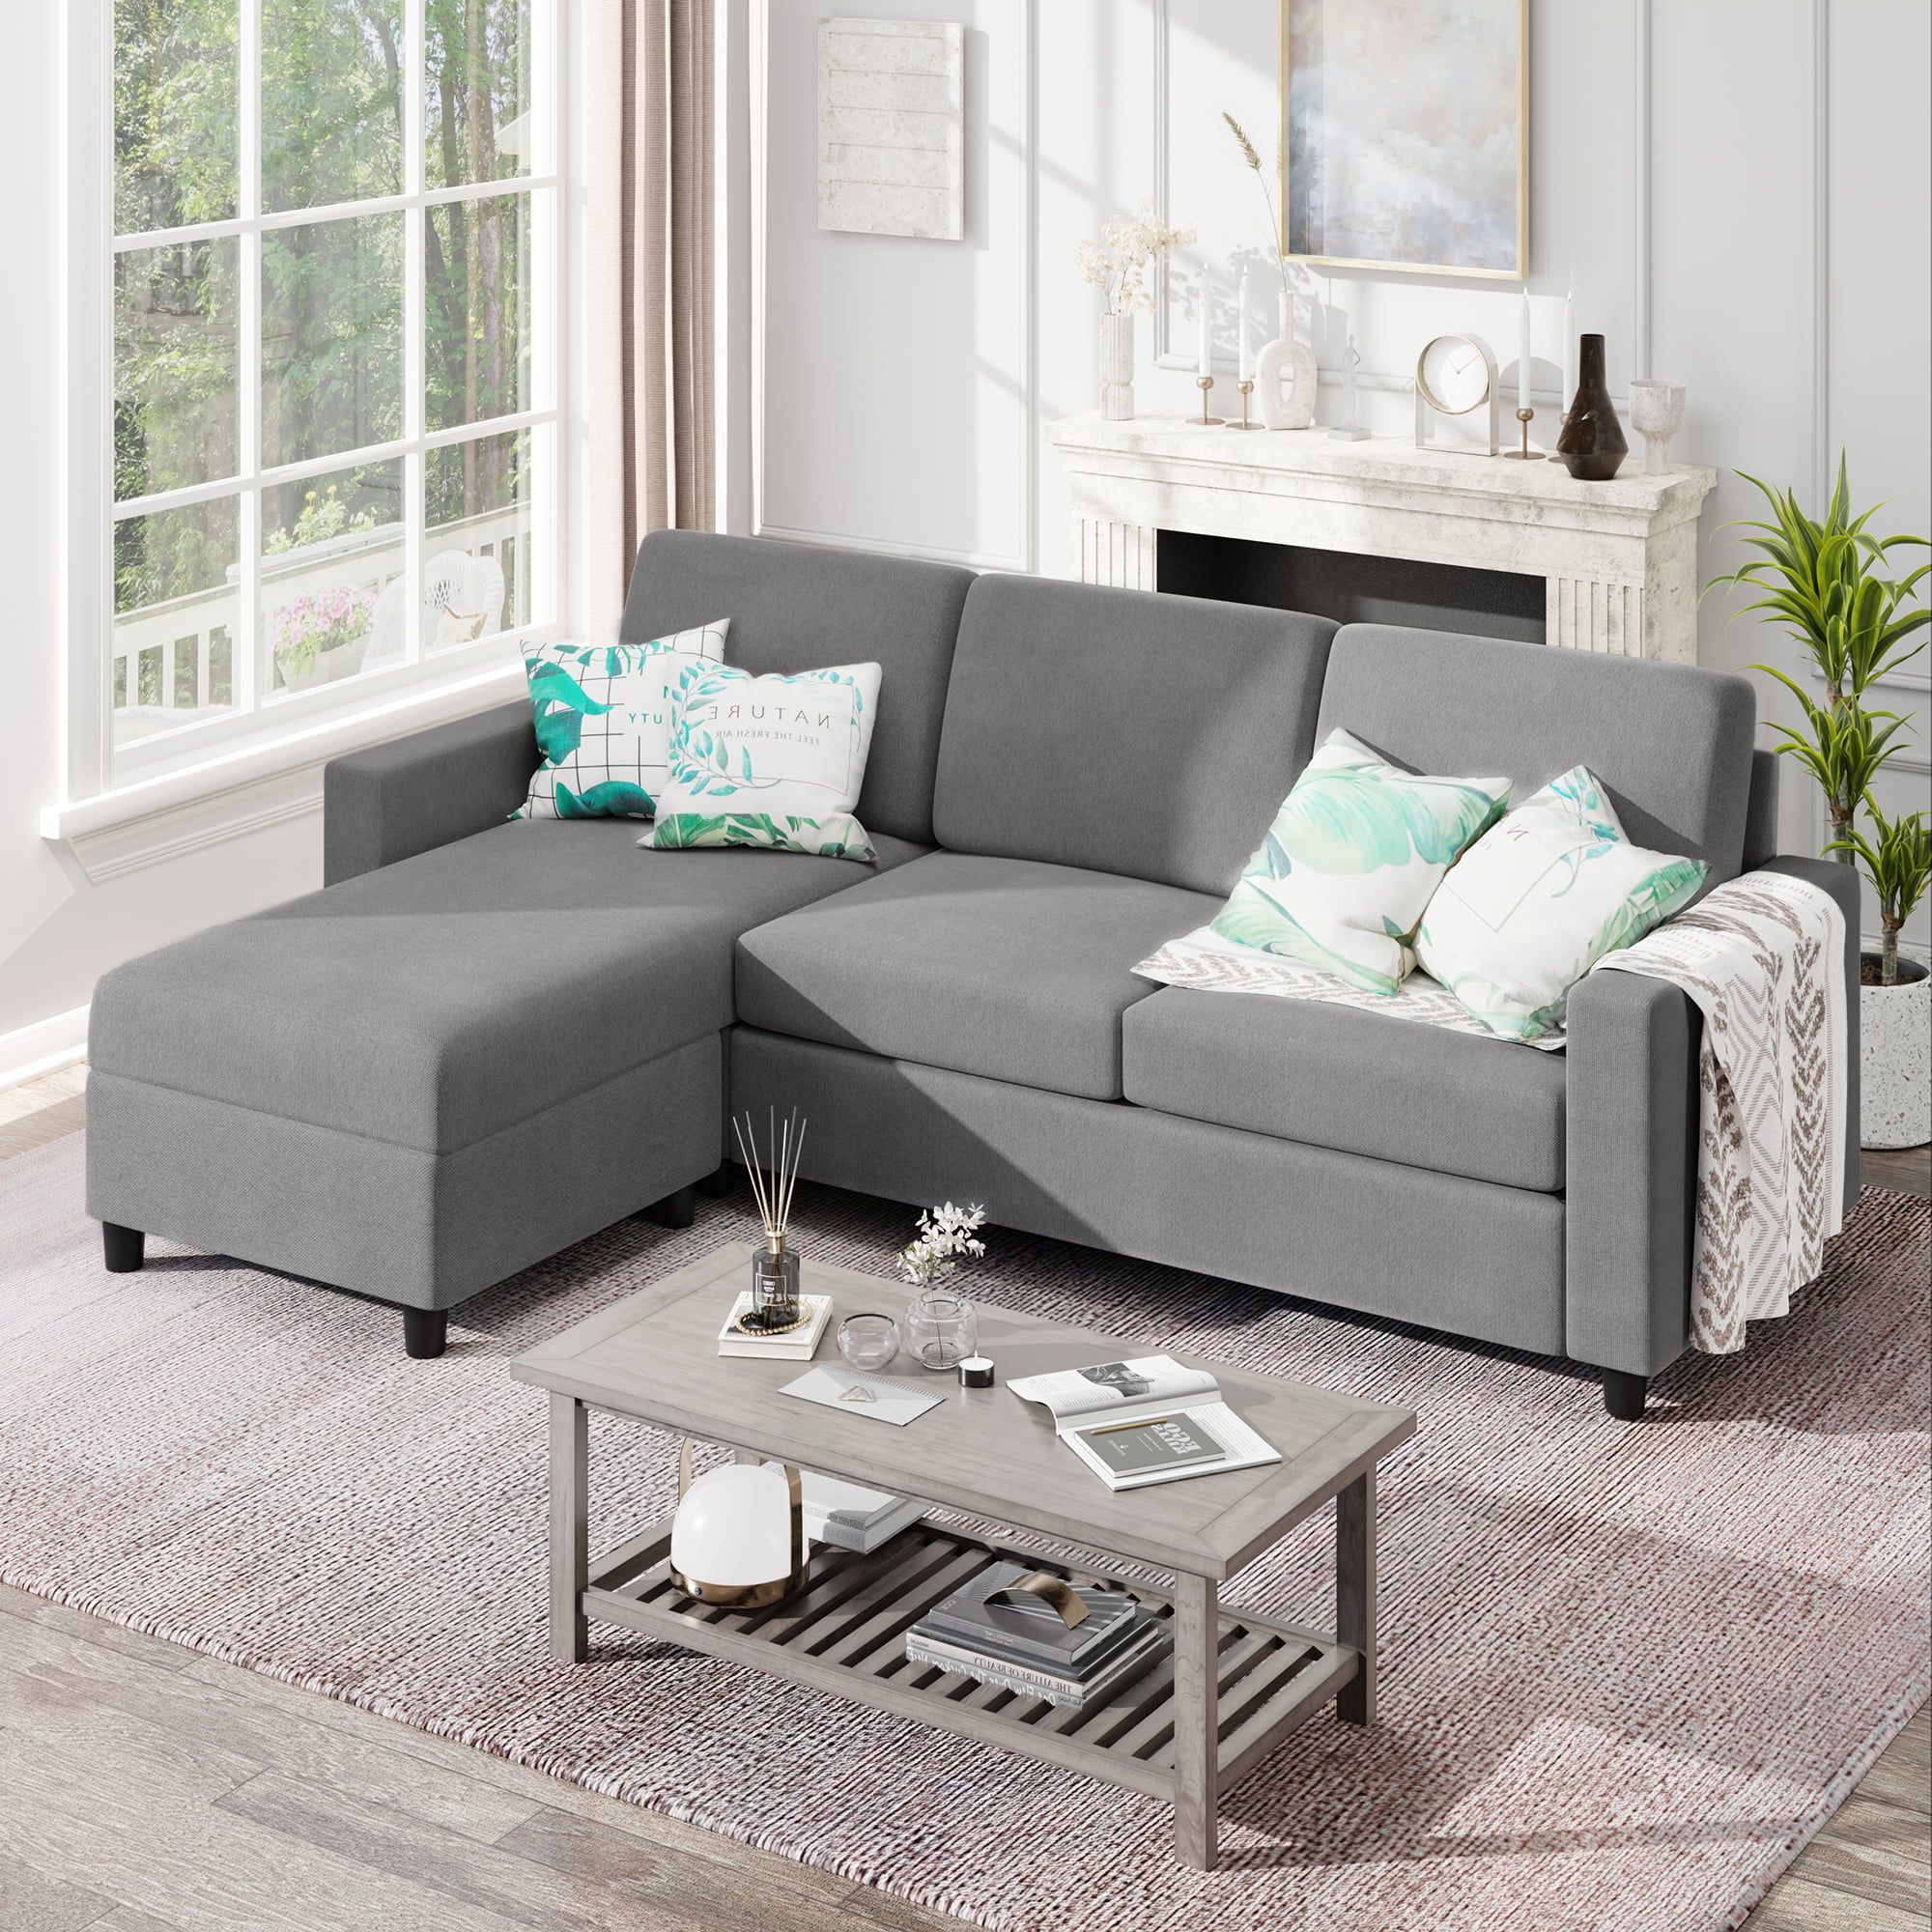 Sobaniilo Convertible Sectional Sofa Couch, Modern Linen Fabric L Shaped  3 Seat Sofa Sectional With Reversible Chaise For Small Space (dark Gray) –  Walmart With Regard To Sectional Couches For Living Room (View 13 of 20)